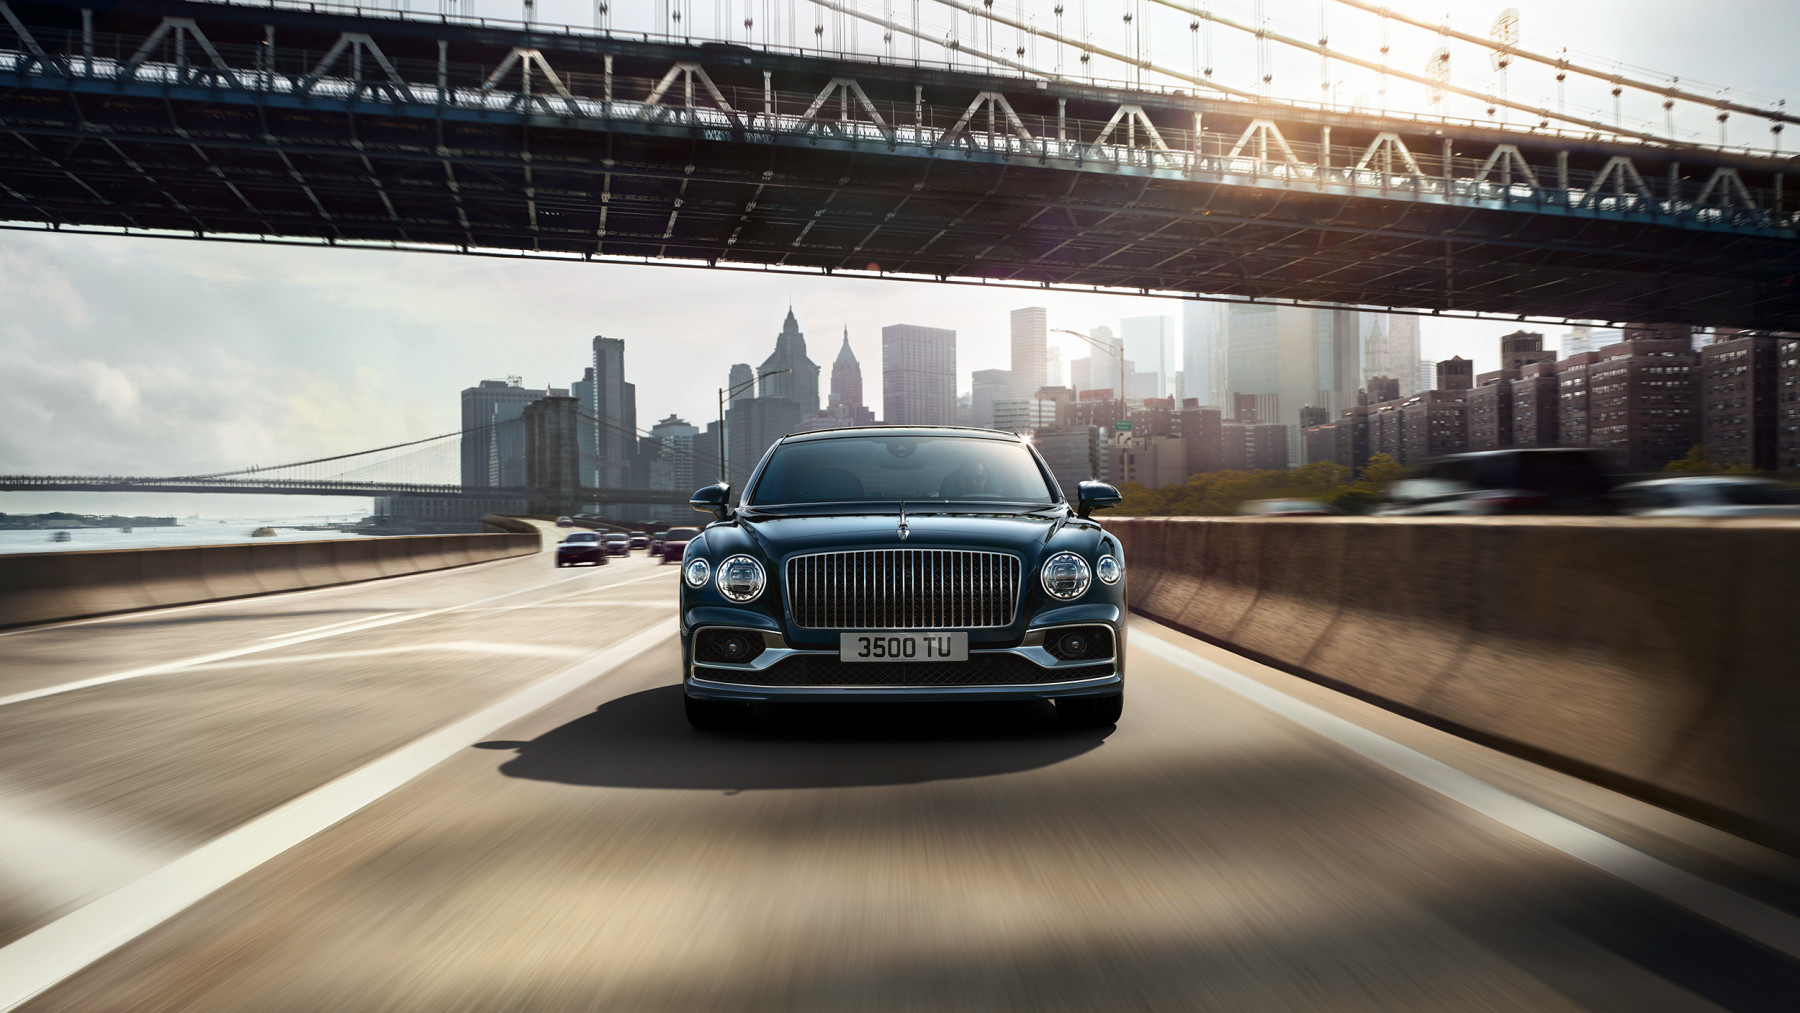 The new Bentley Flying Spur 4